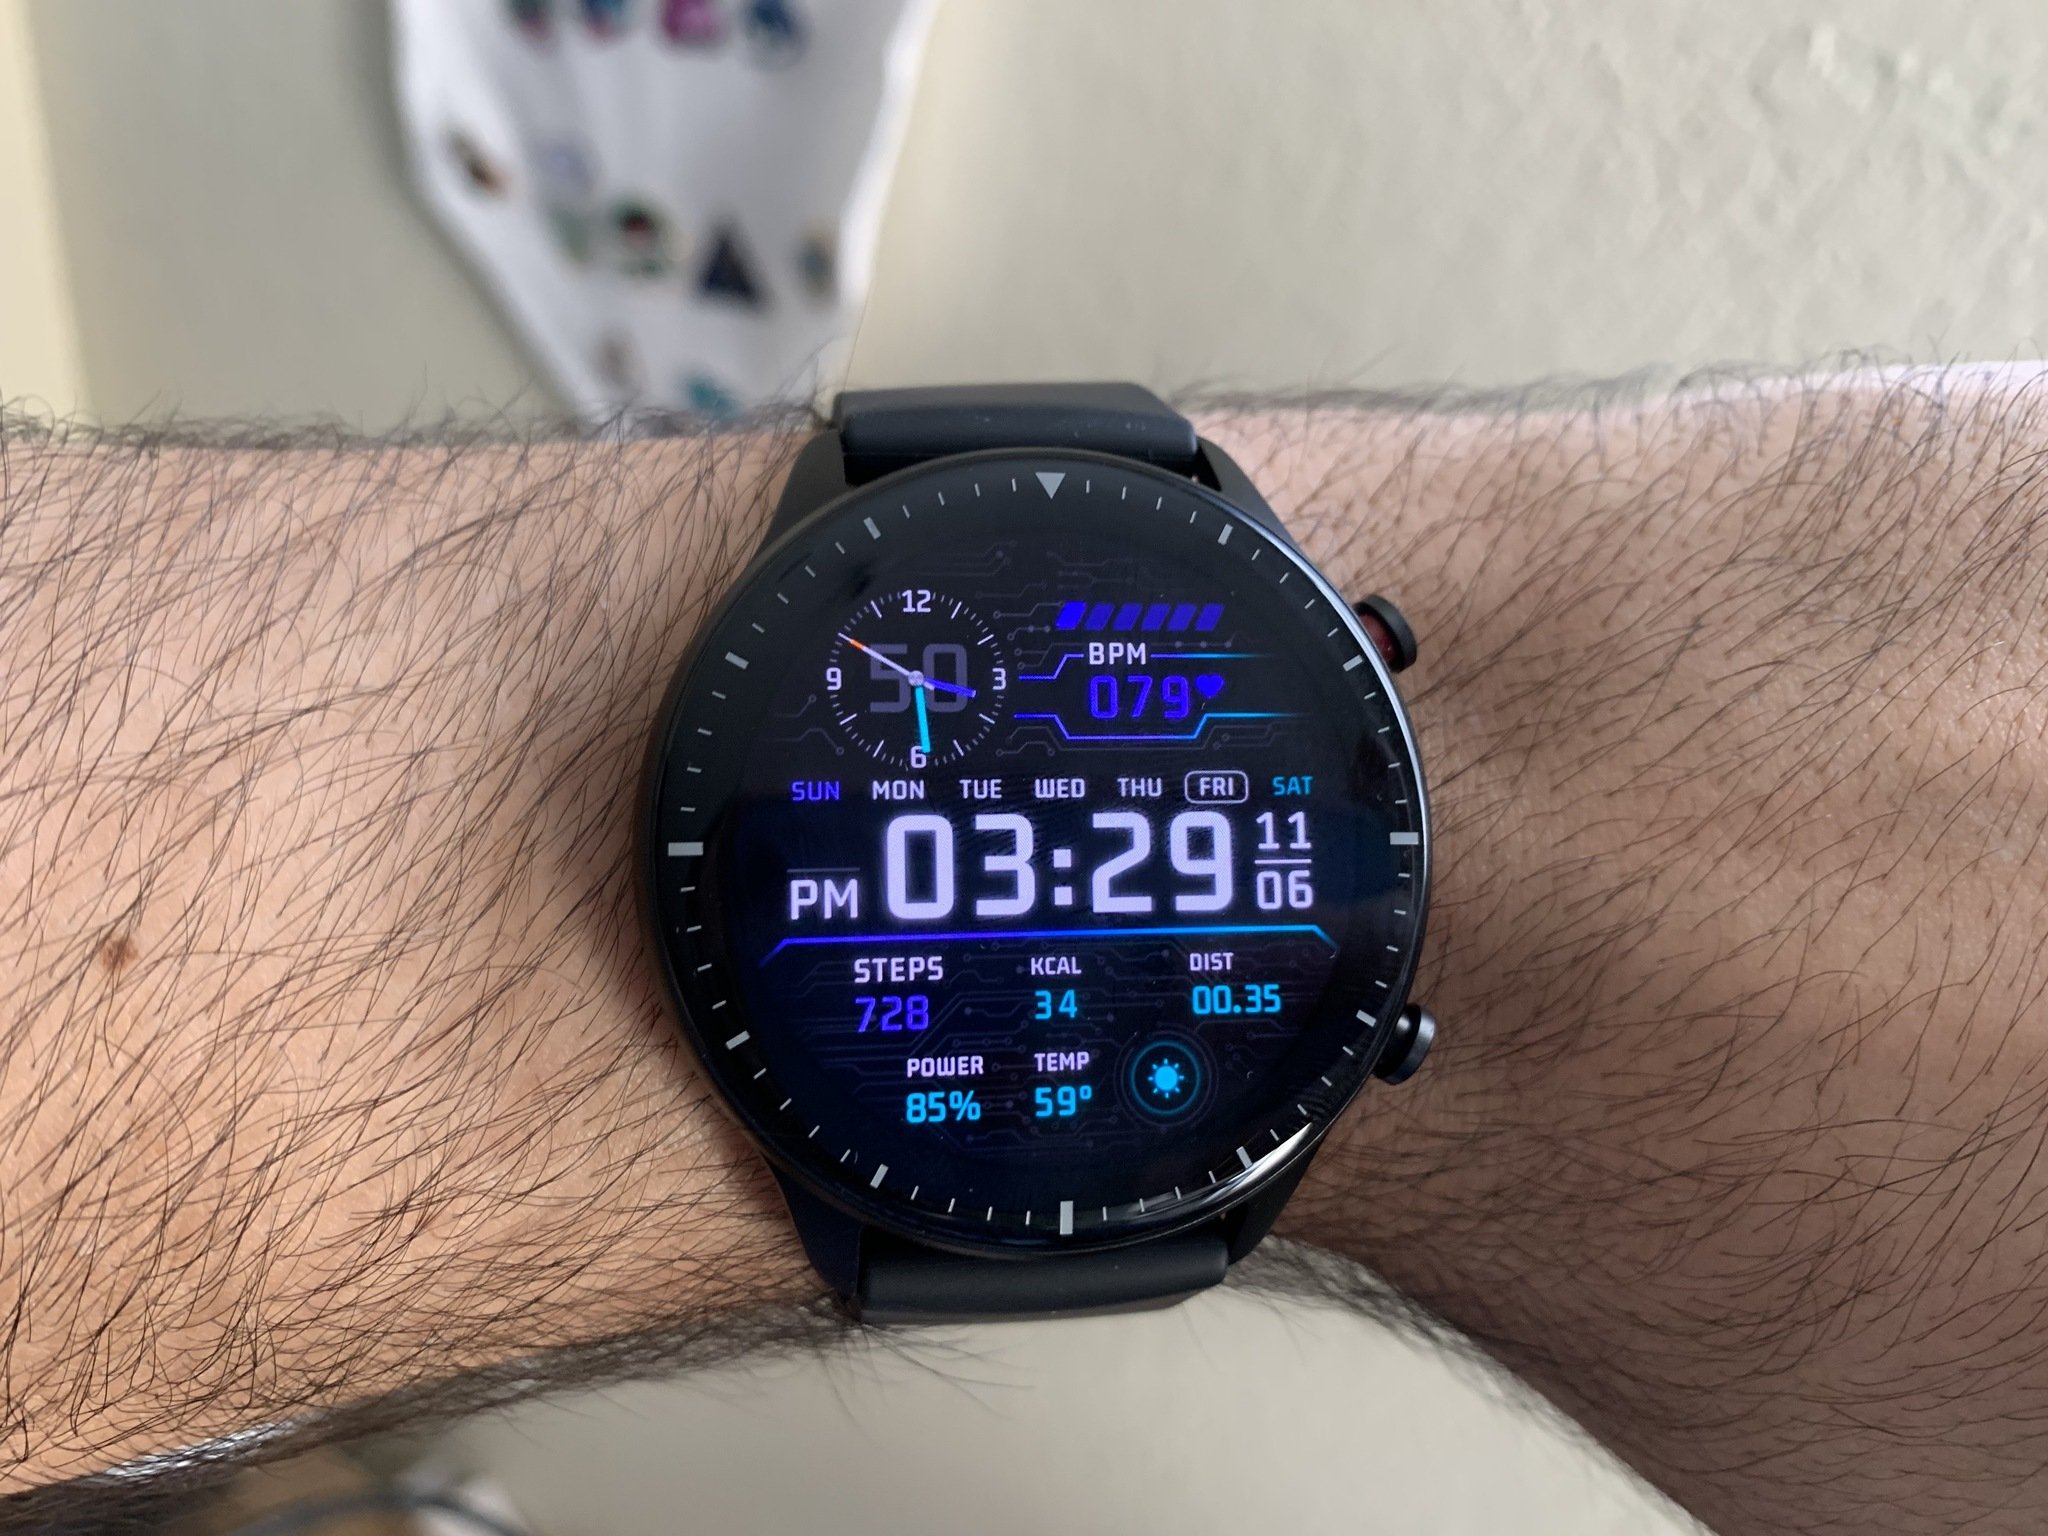 Amazfit GTR 2 display showing BPM, steps and other detailed info